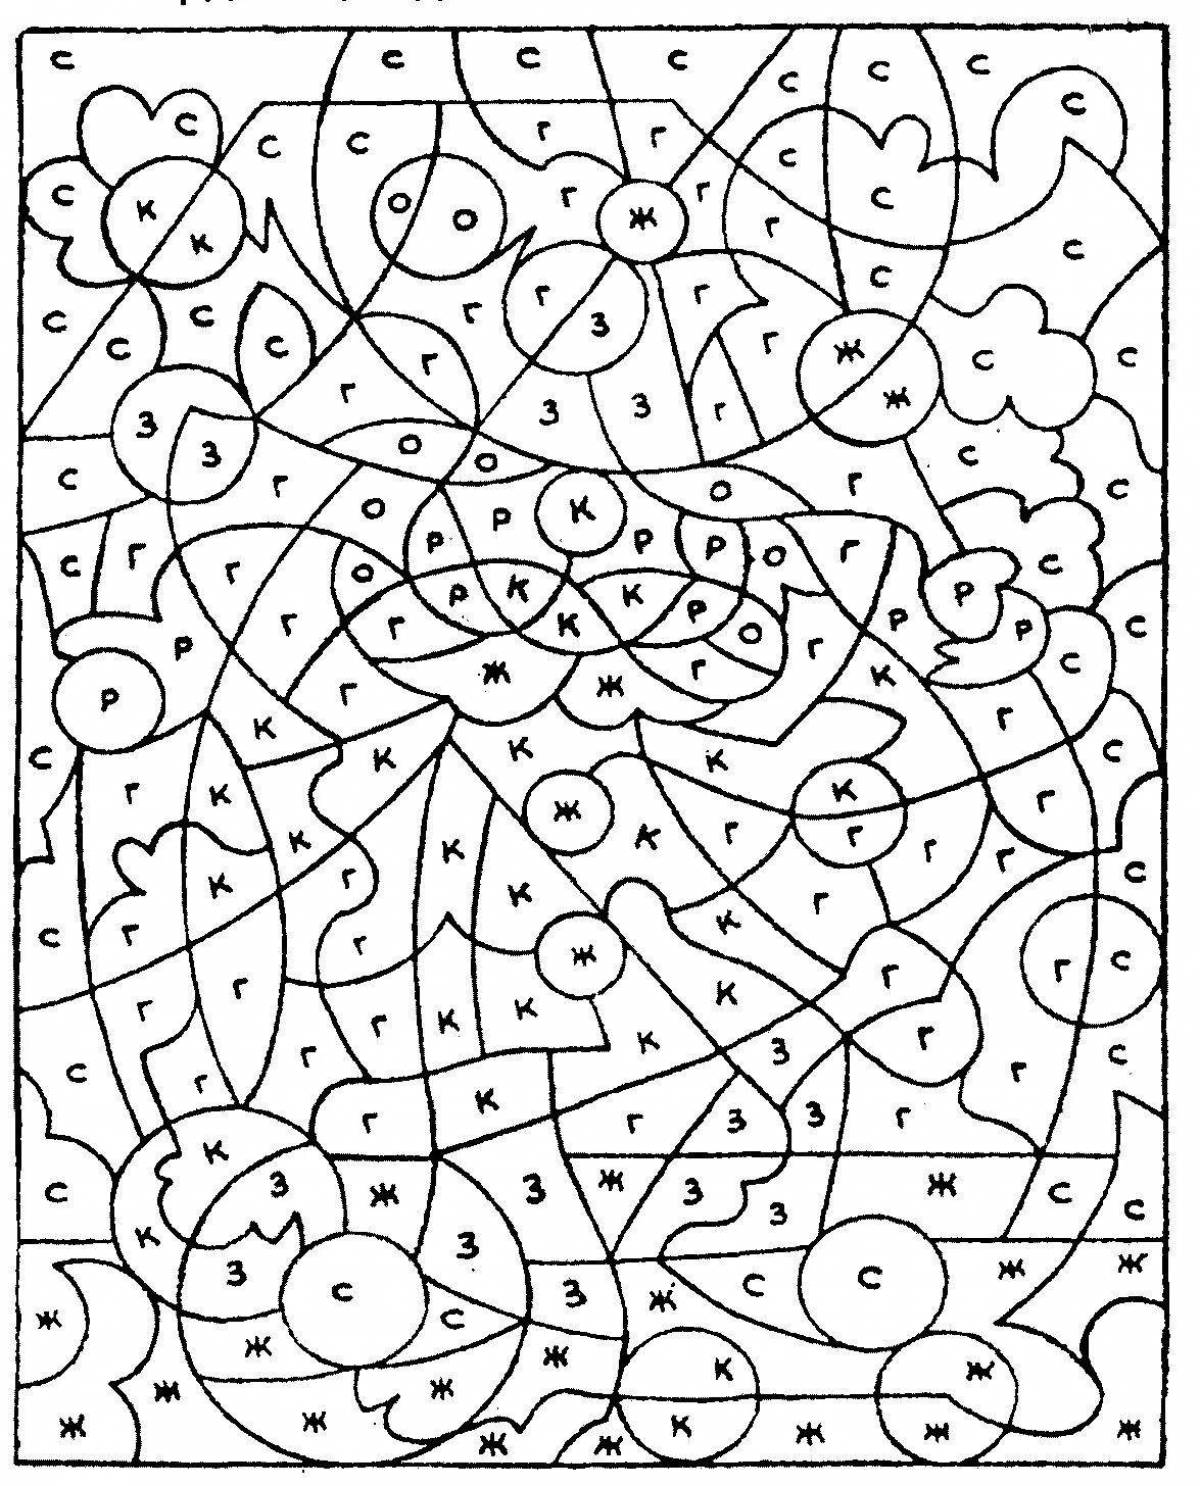 Adorable puzzle coloring book for 4-5 year olds